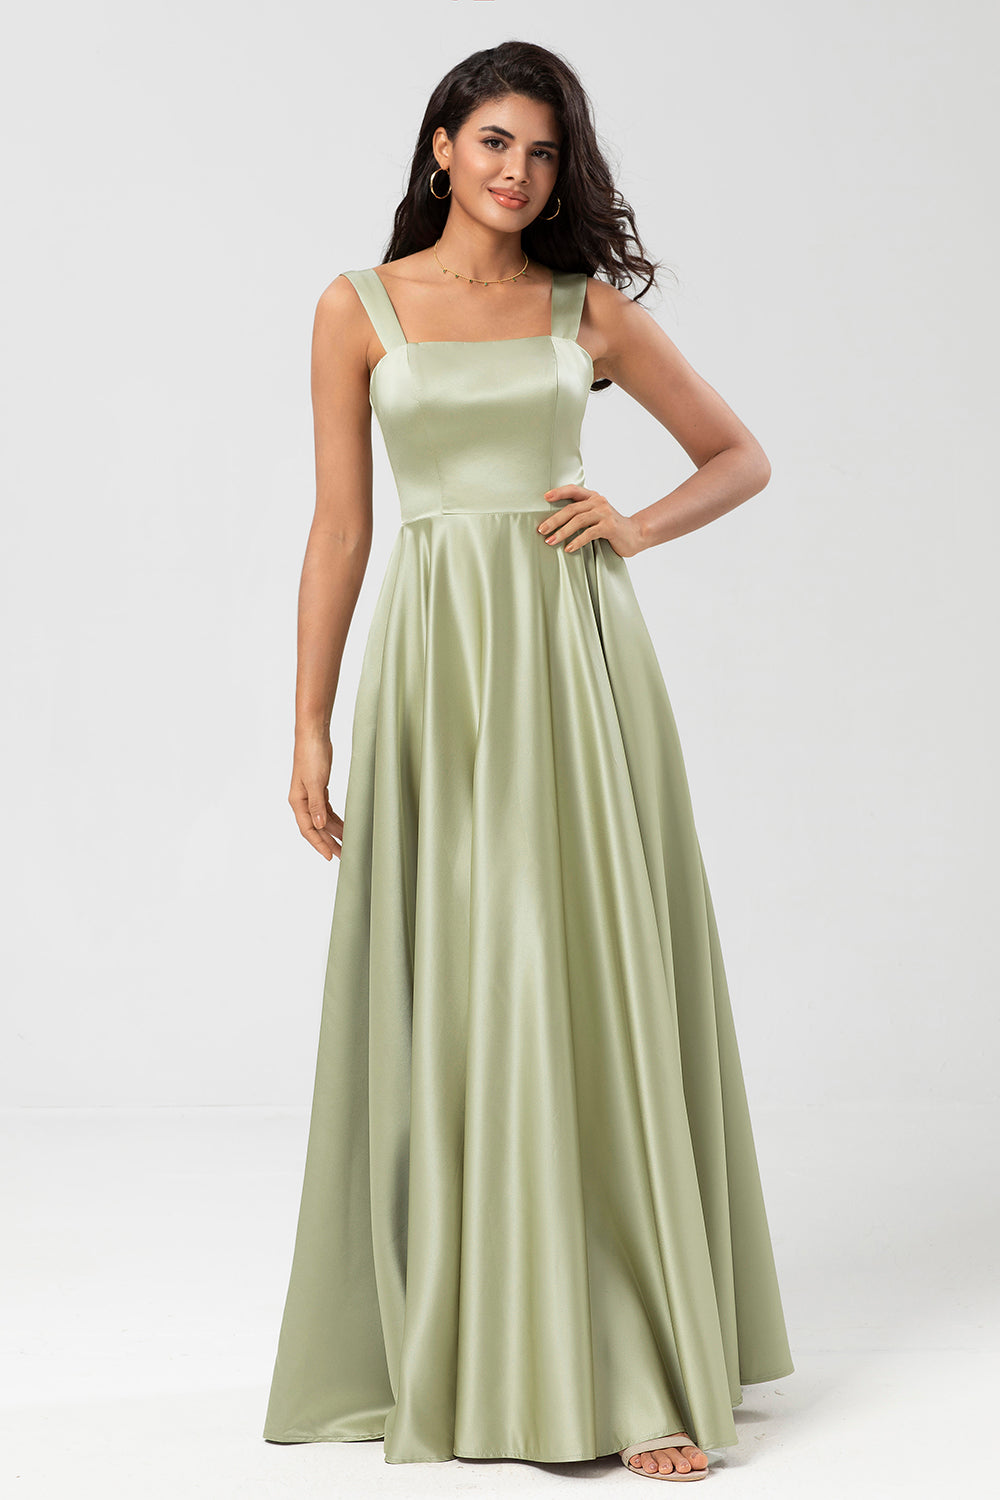 Dusty Sage A-Line Square Neck Floor-Length Satin Bridesmaid Dress with Pocket